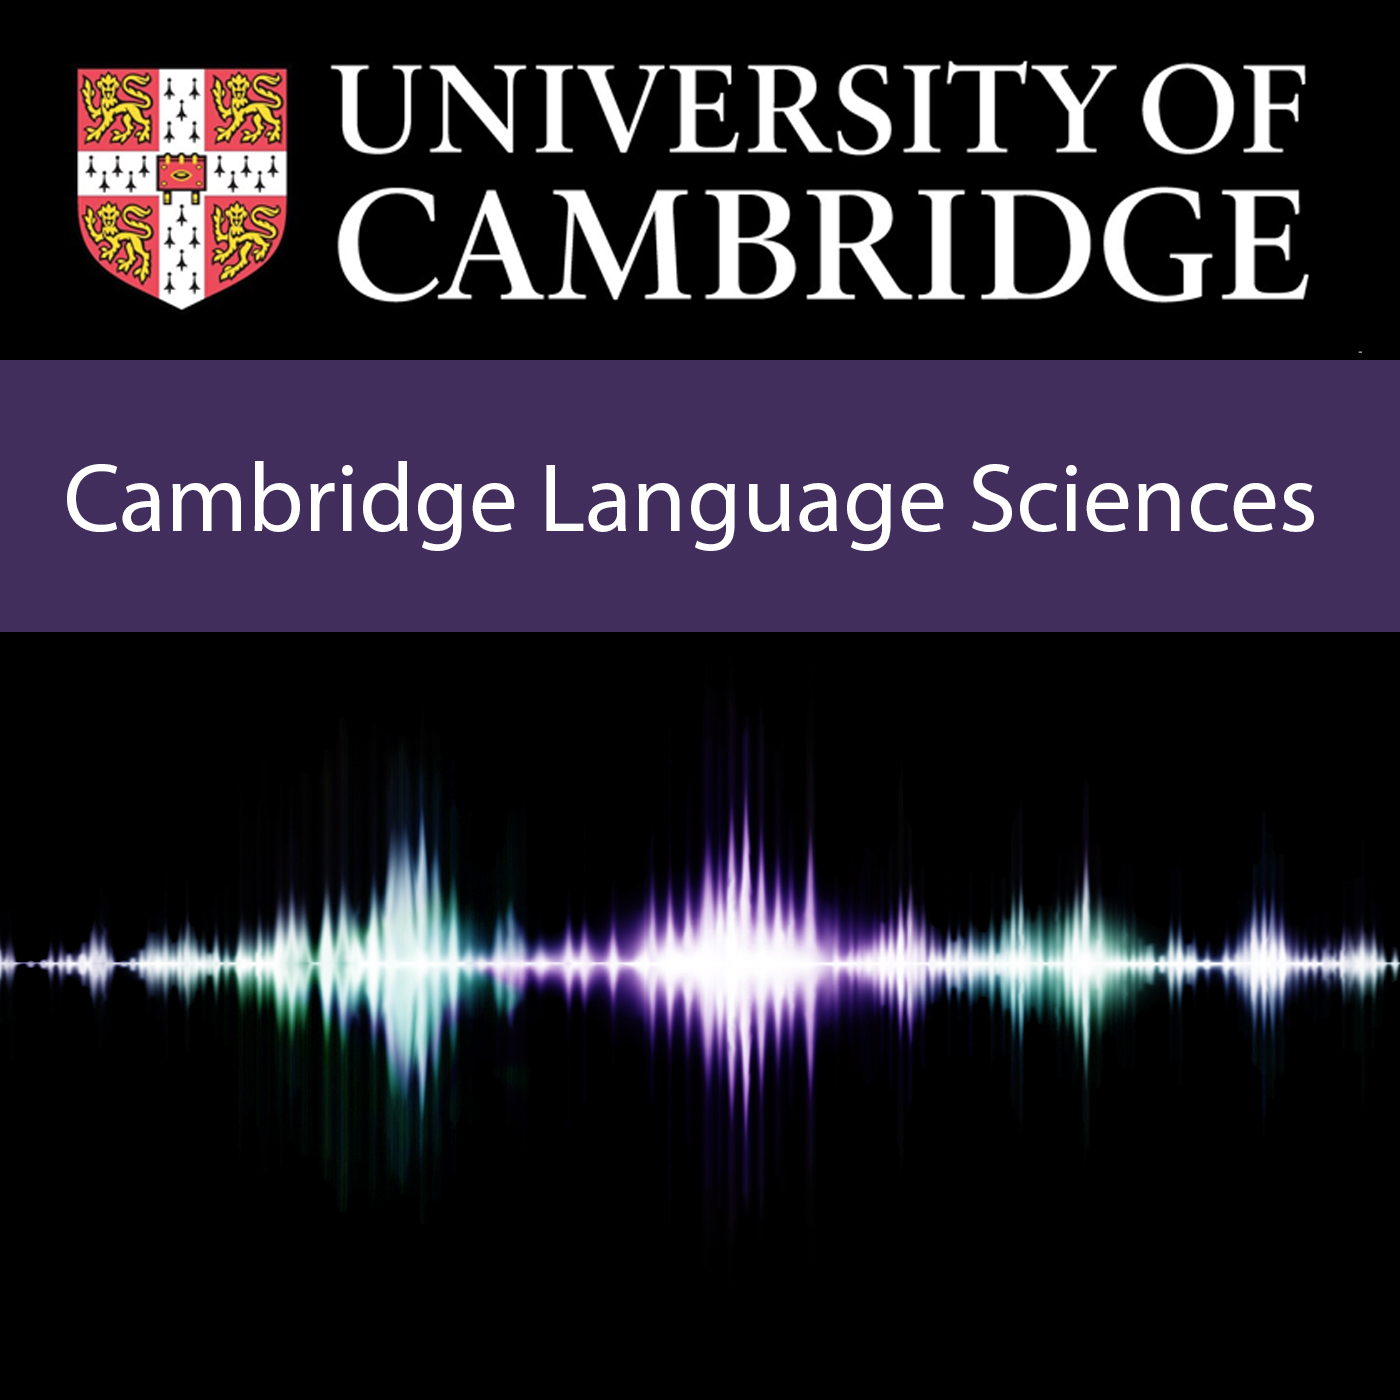 Language sciences research symposium for early-career researchers, 2021's image